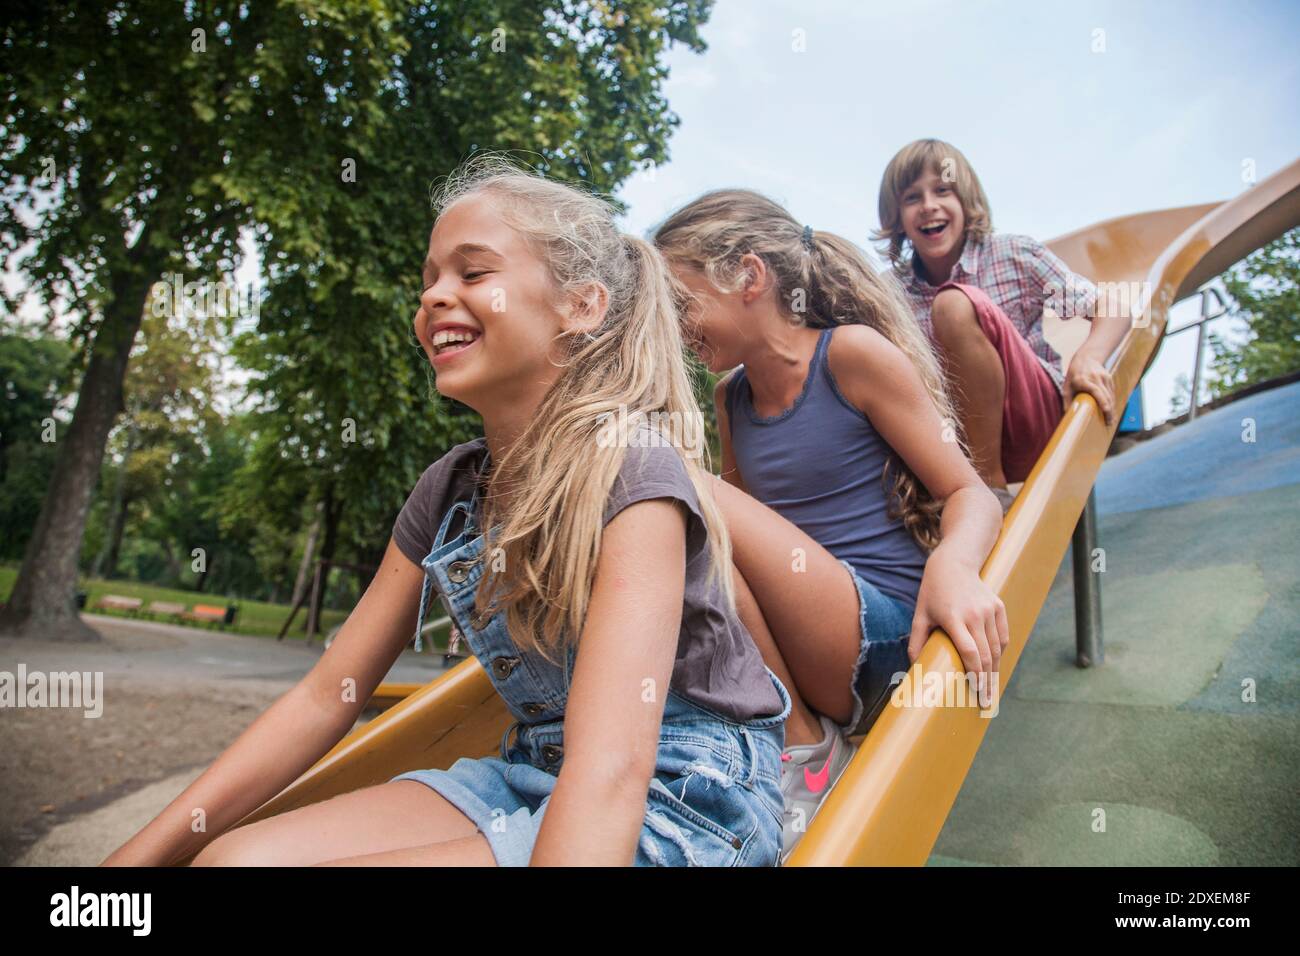 Children 9-11, playing on a slide in the park, Budapest, Hungary Stock Photo